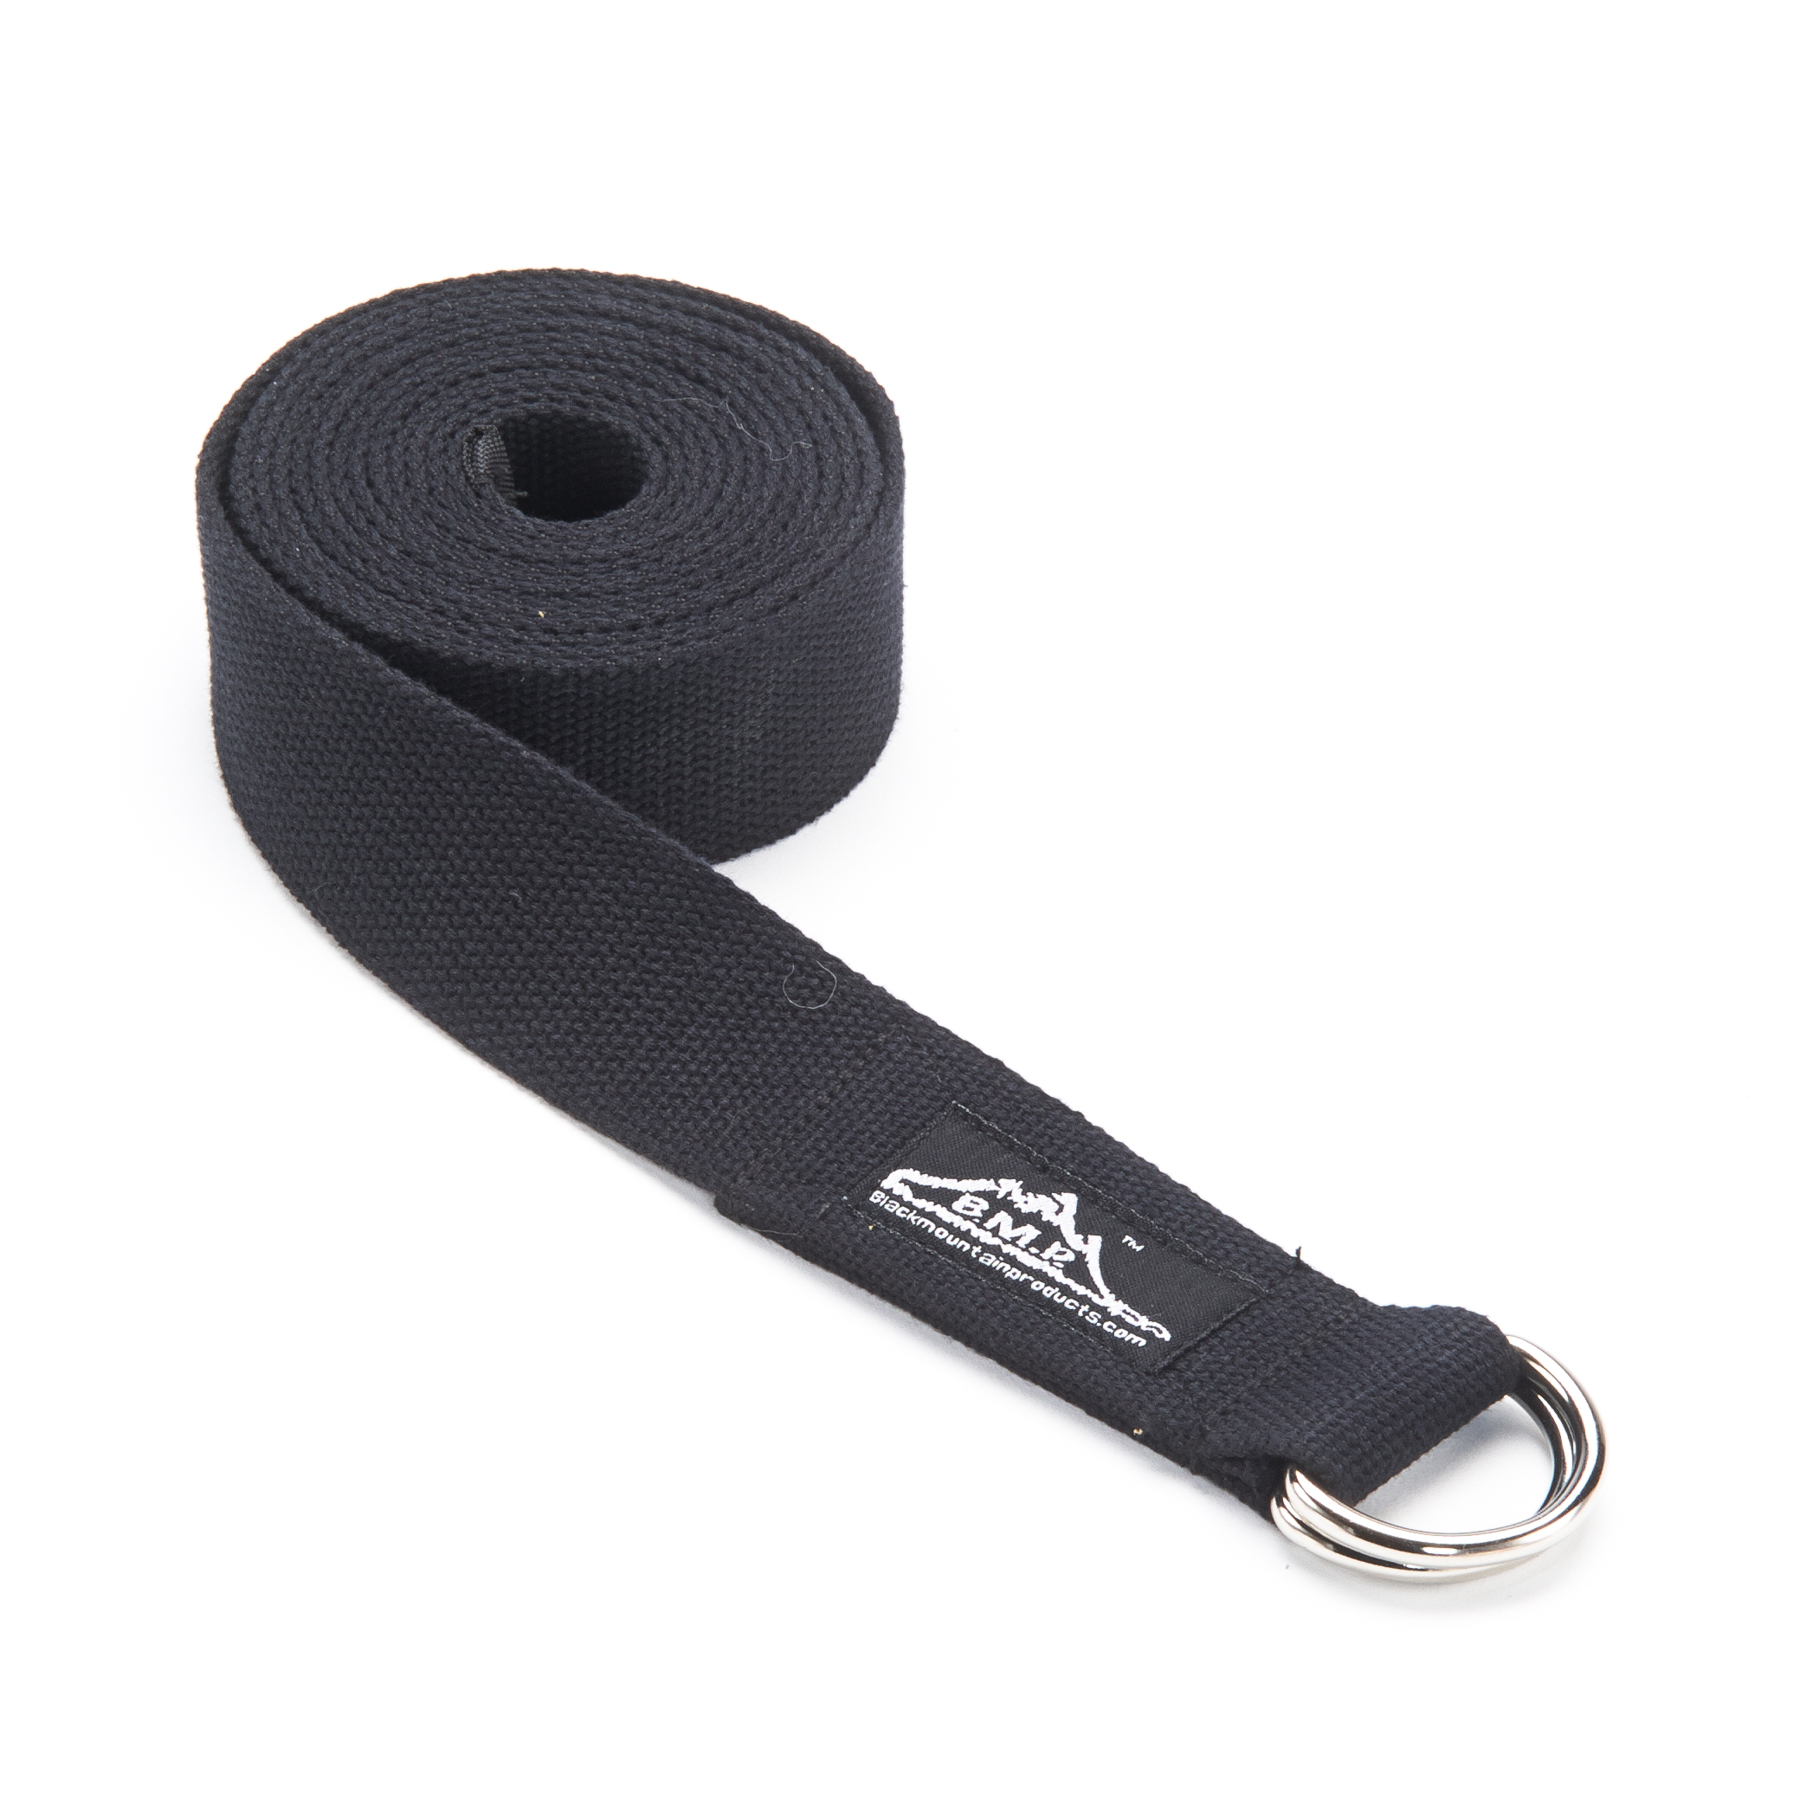 https://blackmountainproducts.com/wp-content/uploads/2017/05/YogaStrap_1800px.jpg